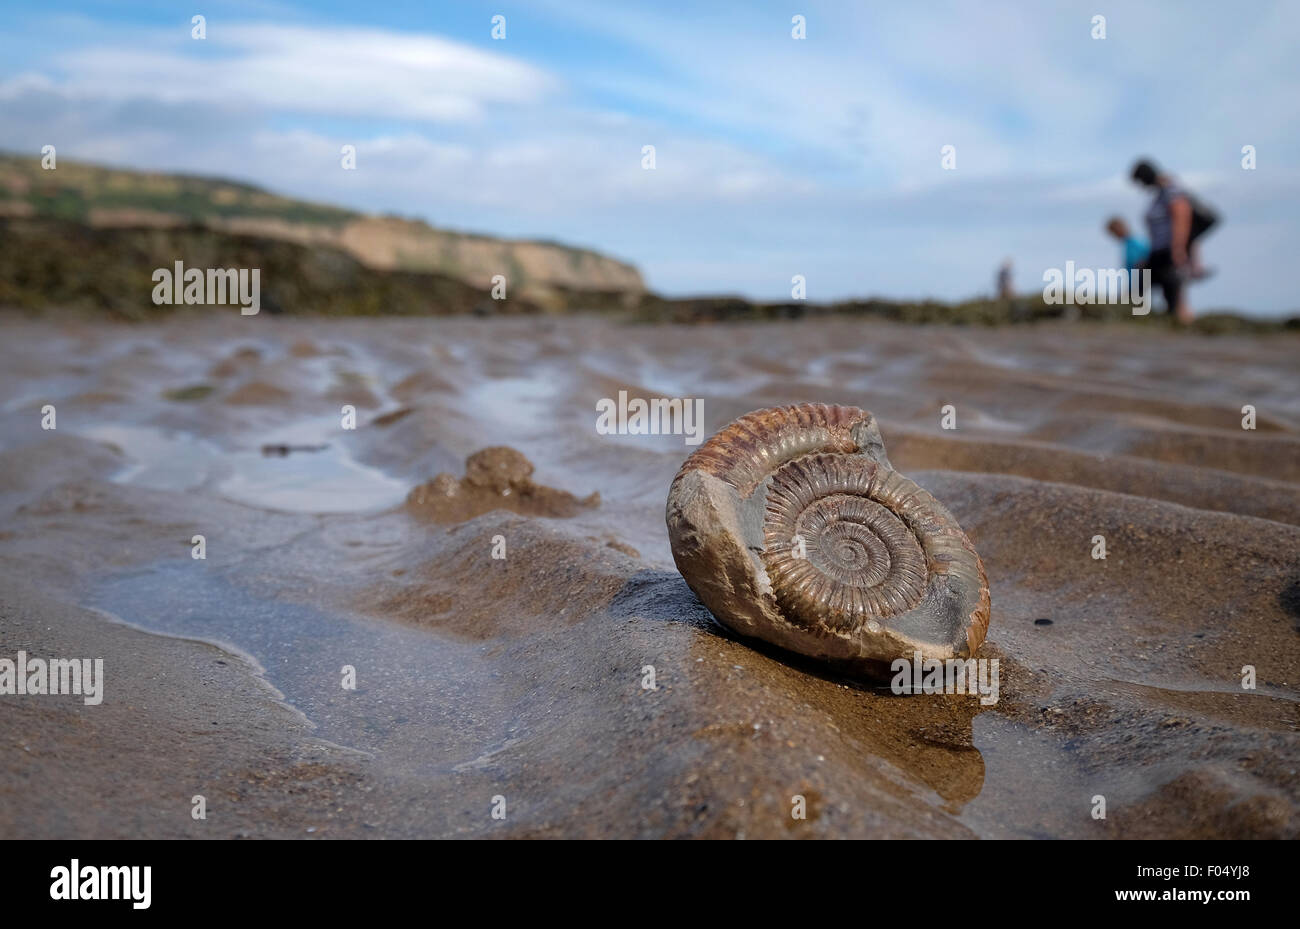 An ammonite fossil on the beach at Robin Hood's Bay, part of the Yorkshire Jurassic Coast, UK Stock Photo